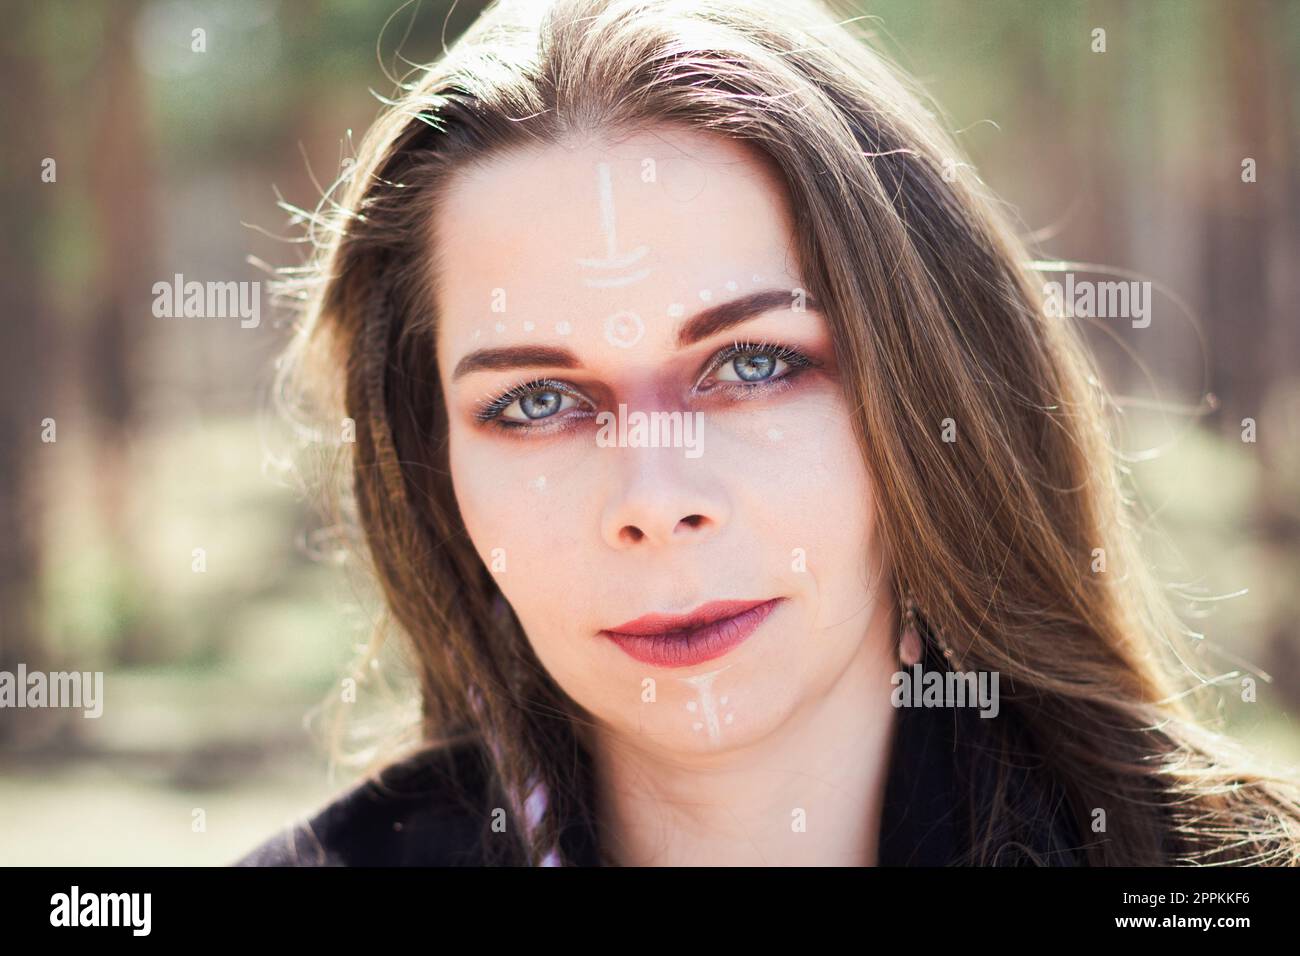 Close up woman with traditional shaman signs on face portrait picture Stock Photo